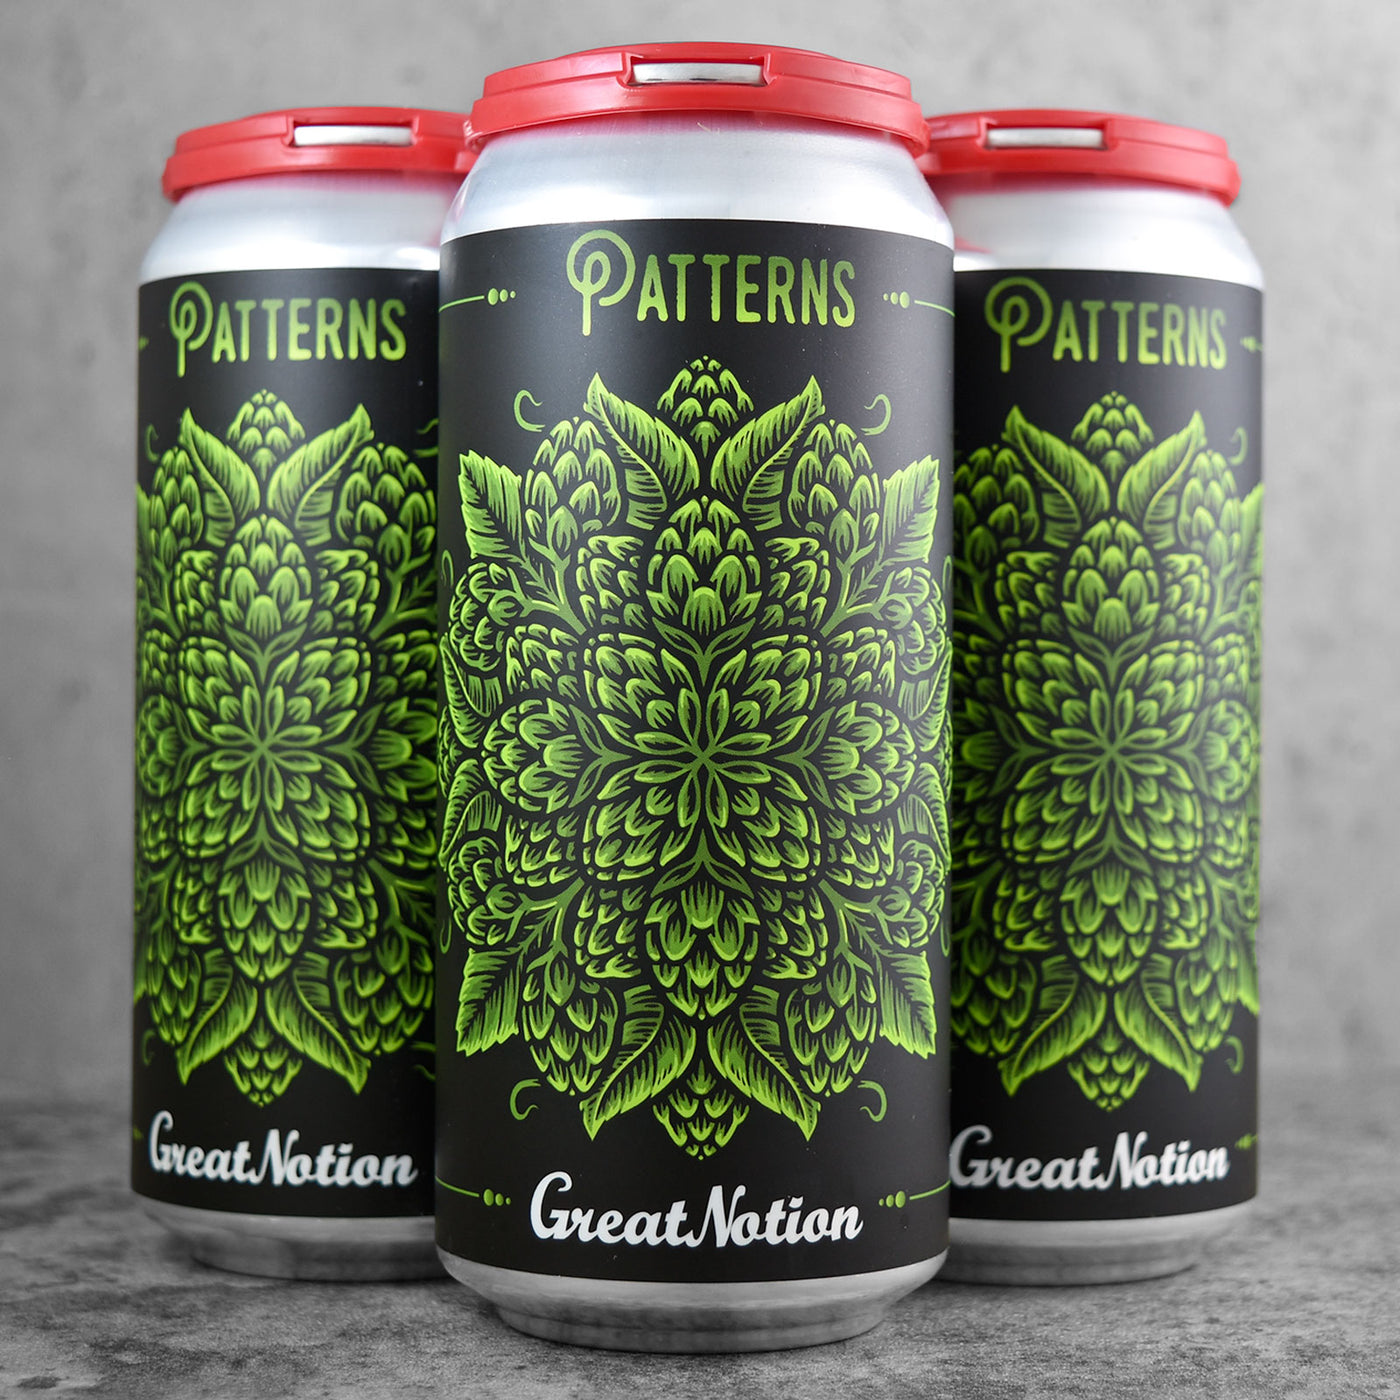 Great Notion Patterns